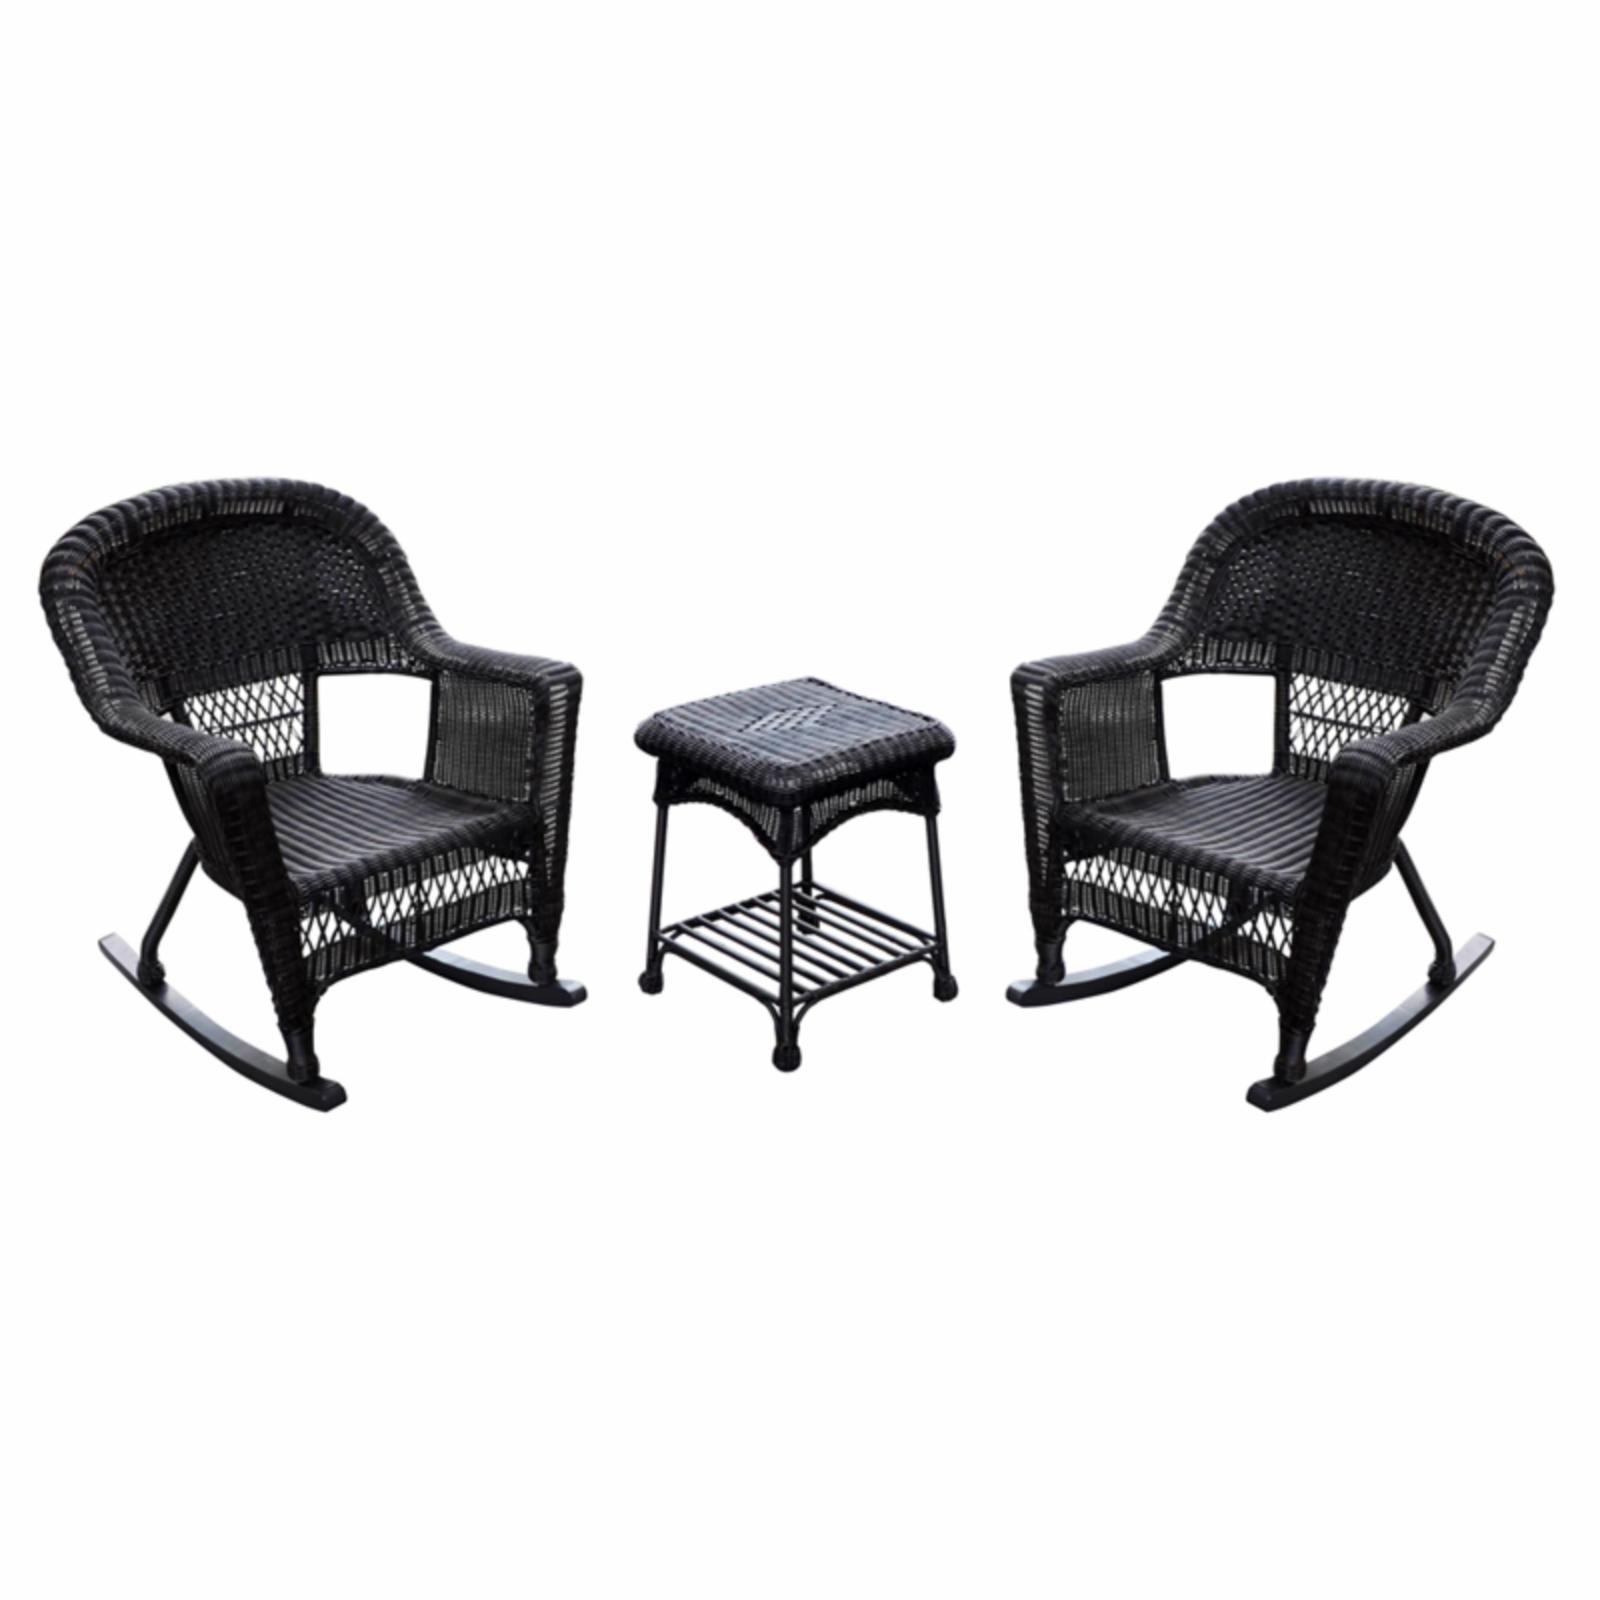 Jeco 3 pc. Wicker Rocker Chair Set with Side Table - image 2 of 2